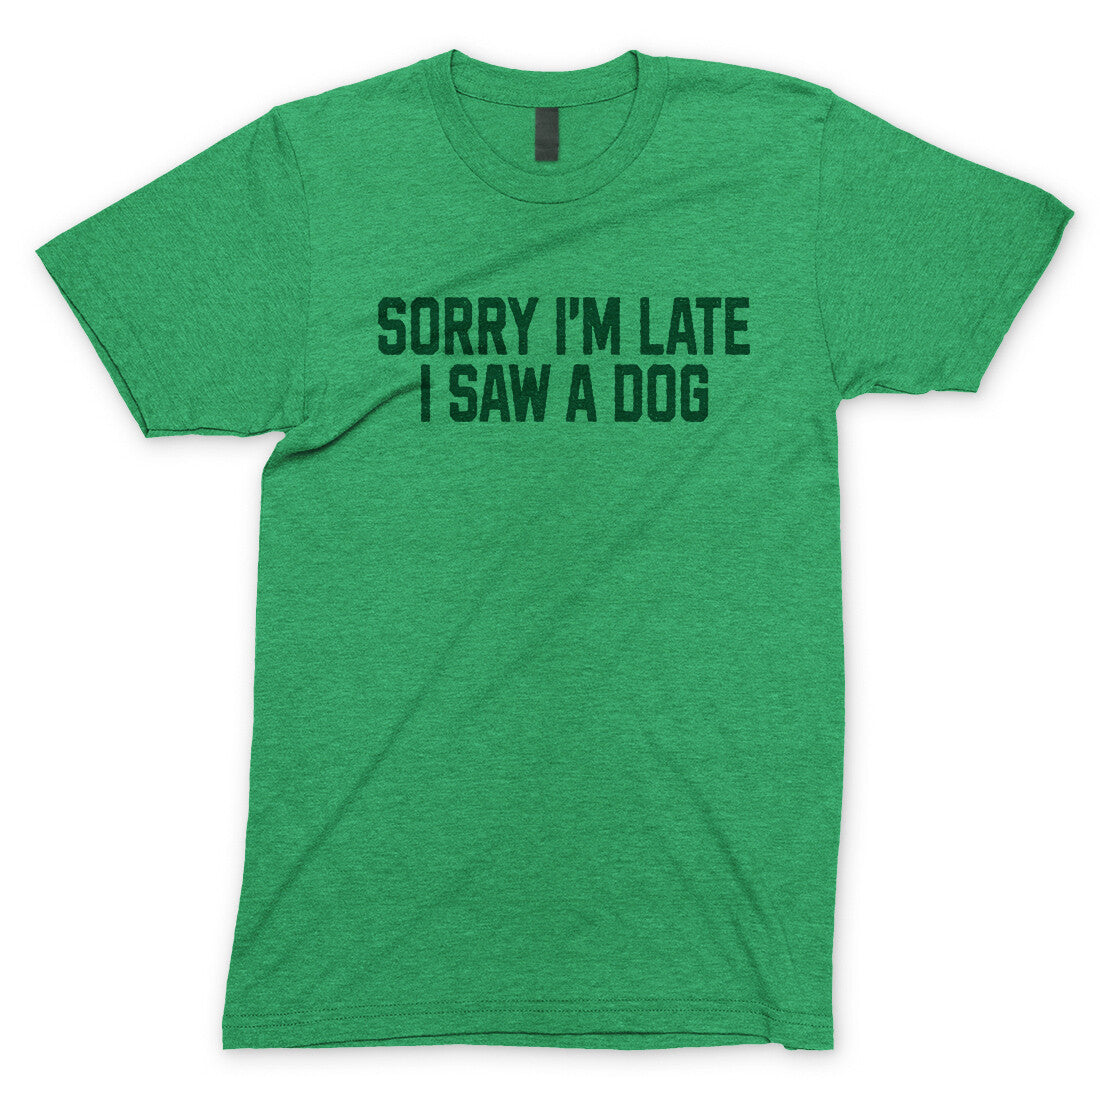 Sorry I'm Late I Saw a Dog in Heather Irish Green Color